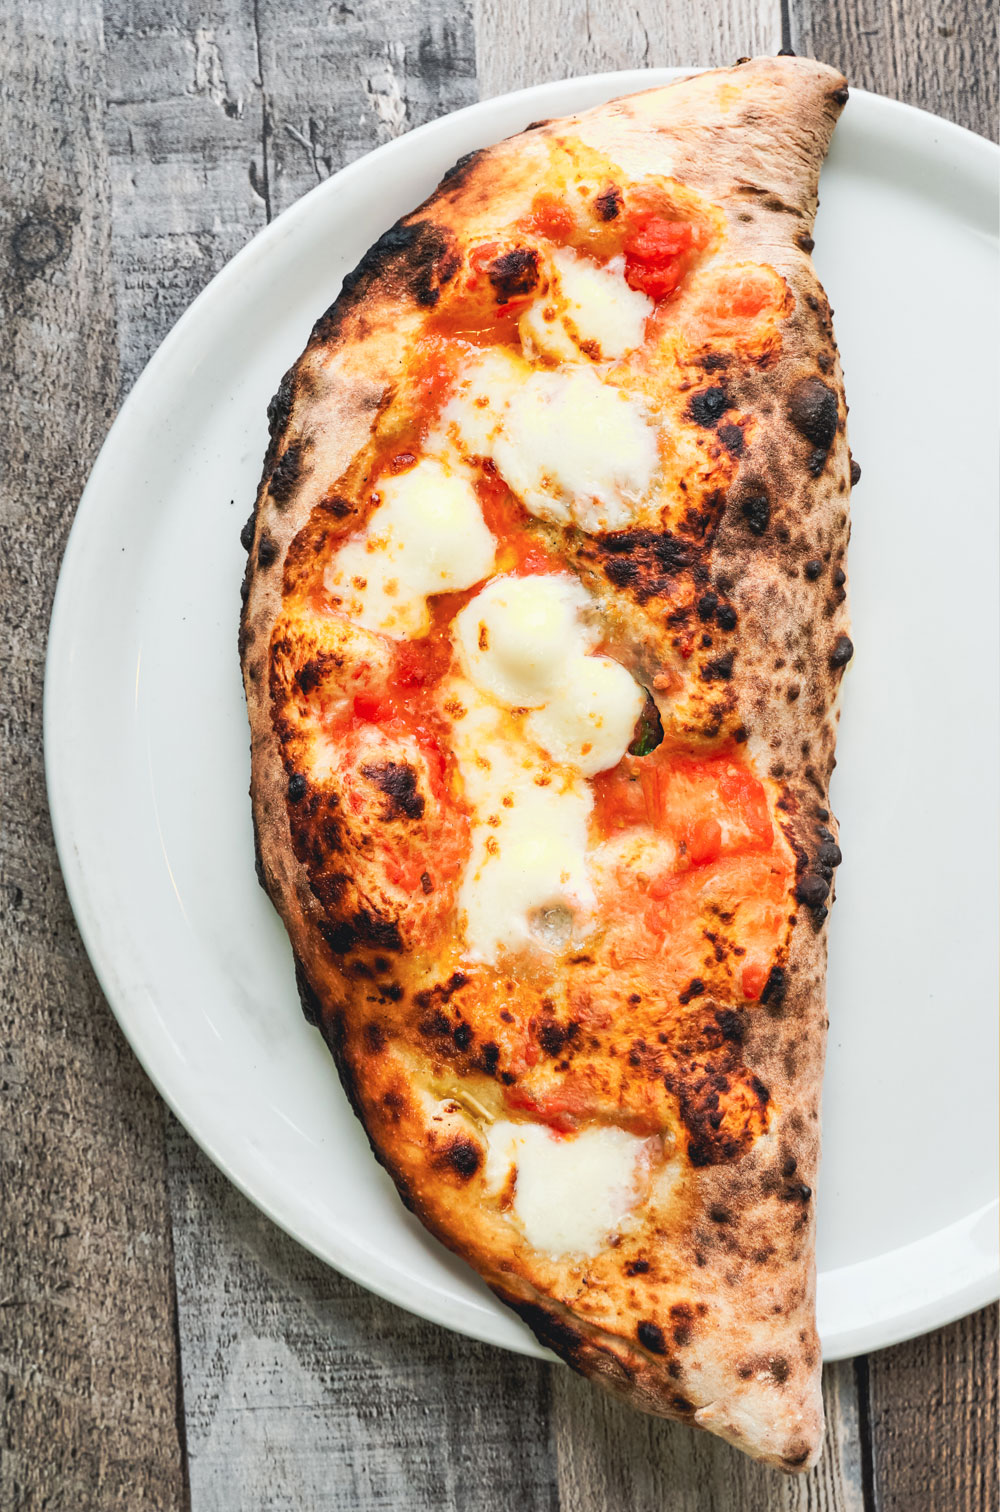 a fresh-made calzone straight from the wood-fired oven at da laposta